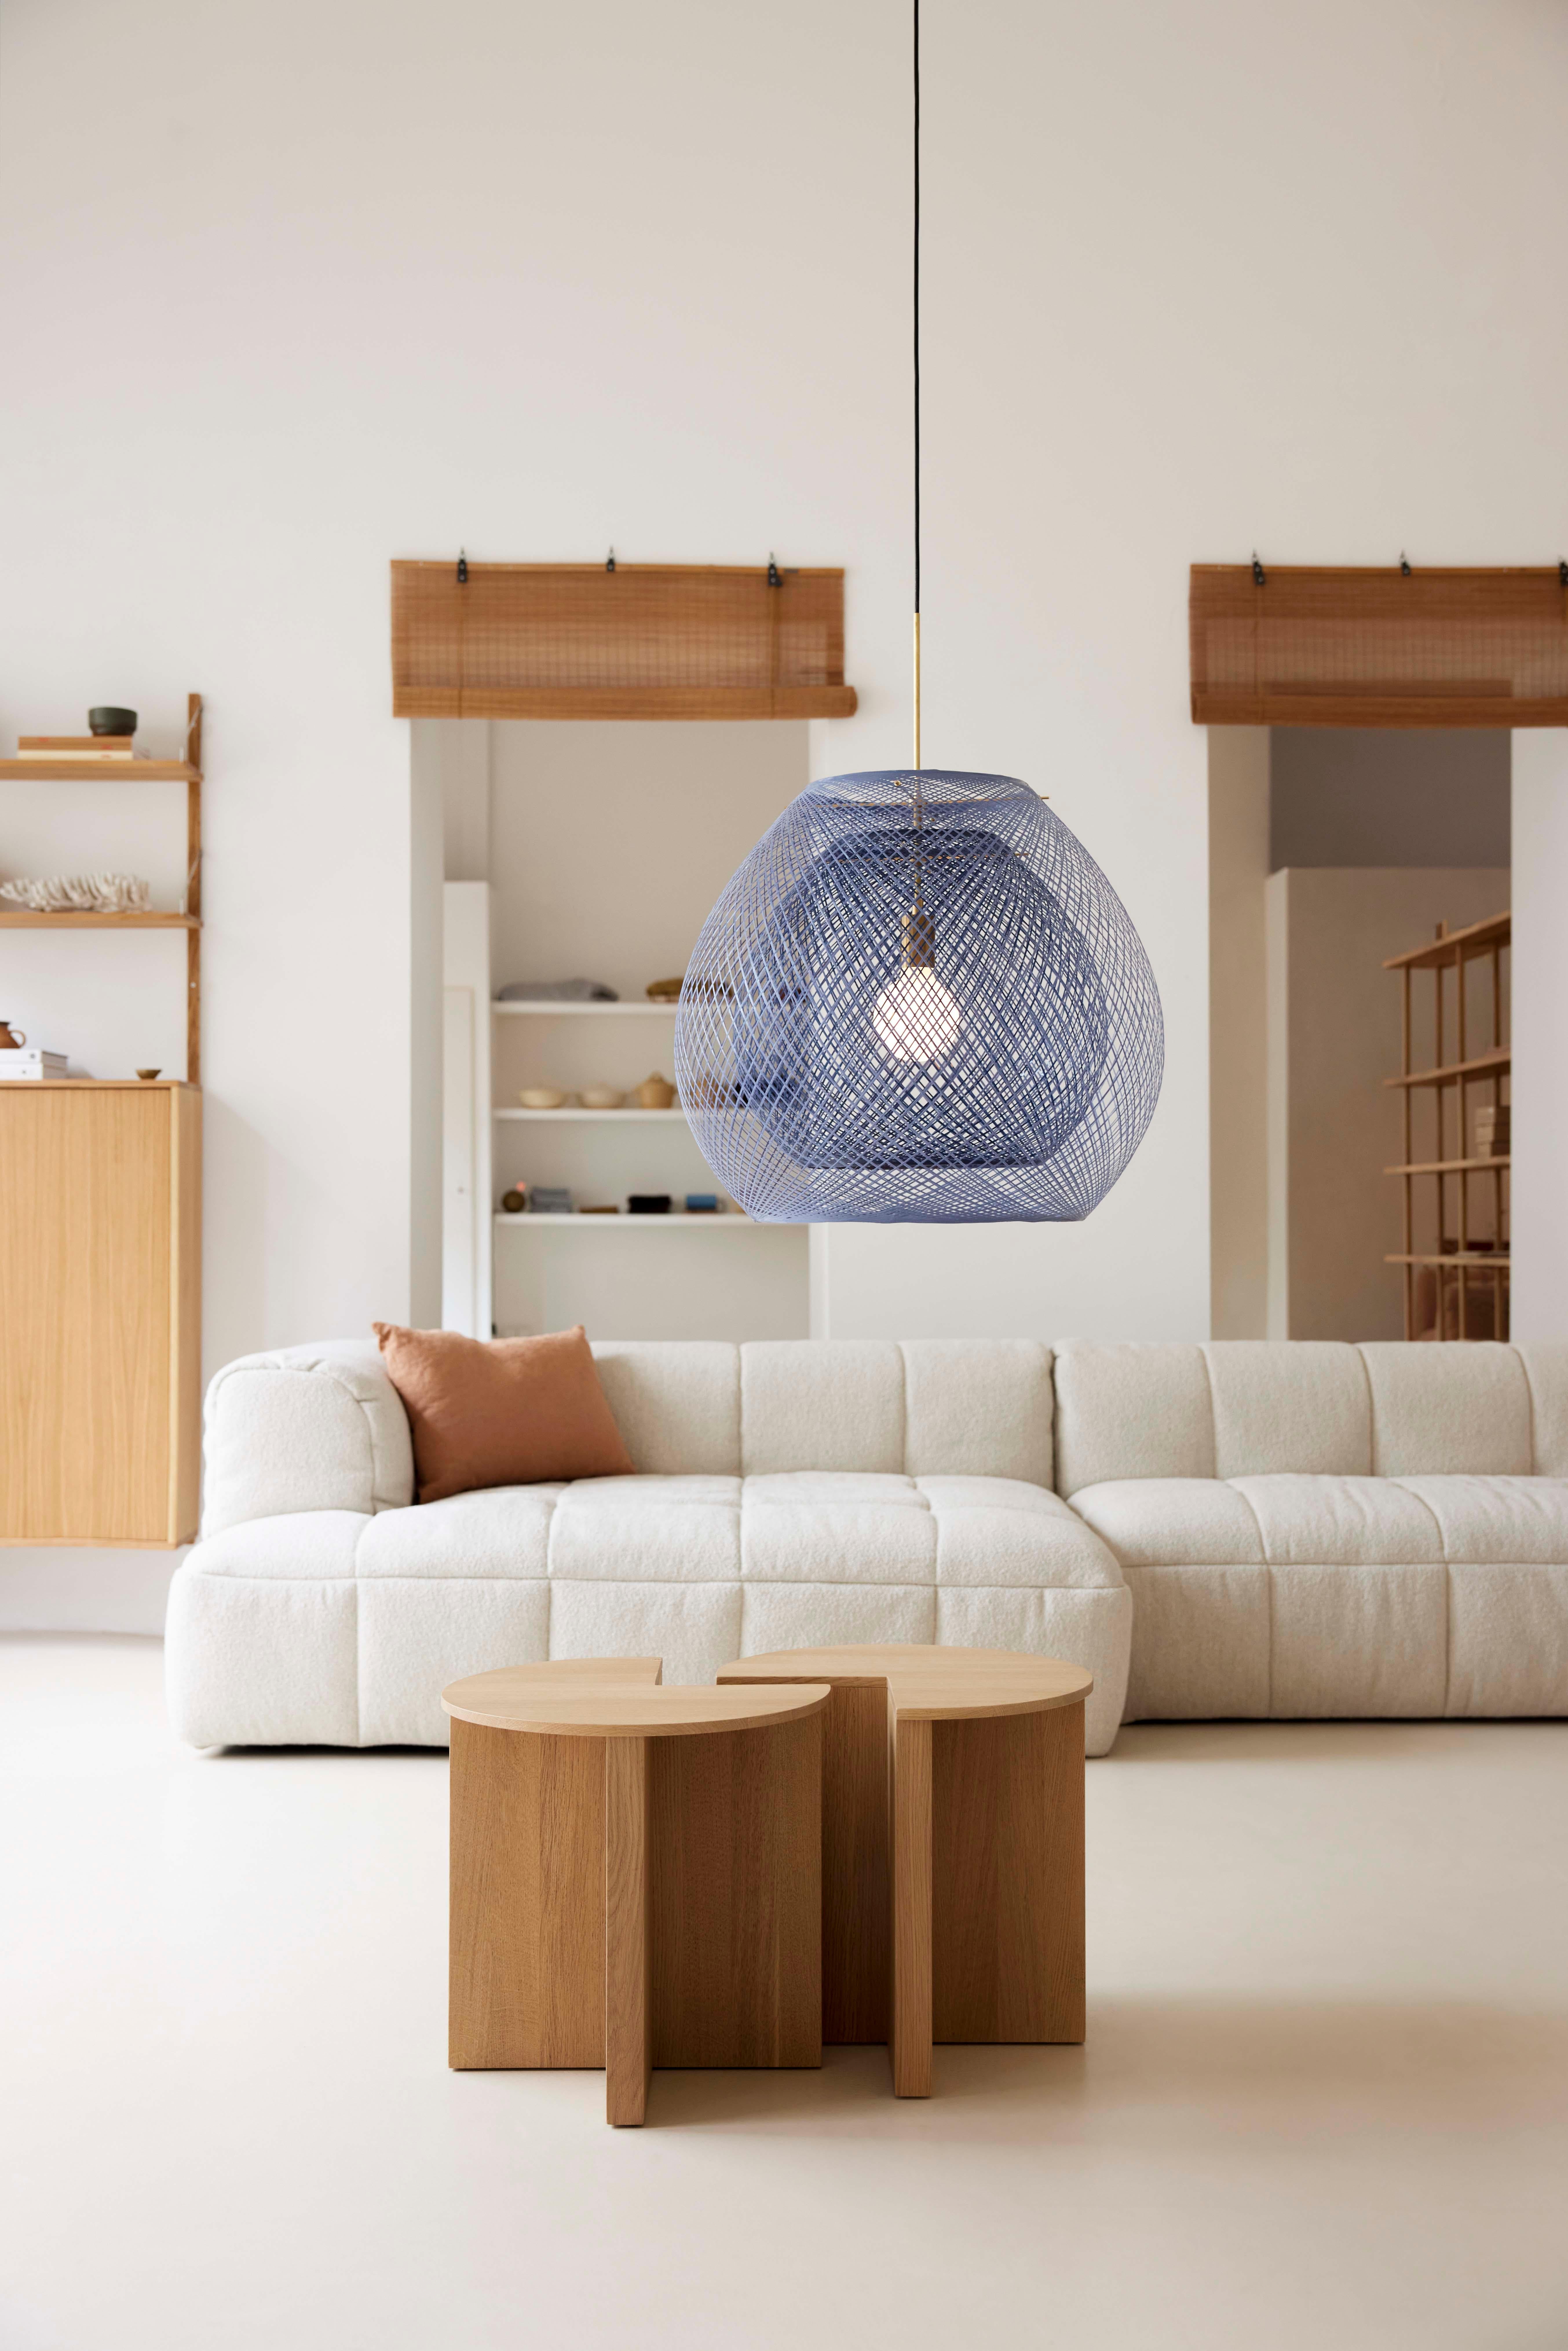 Large Indigo Night Twilight Set pendant lamp by Atelier Robotiq
Dimensions: D 72 x H 64 cm
Materials: Resin-impregnated industrial fiber.
Available in different colors: Golden Hour, Pink Moon, and Indigo Night.
Also available in single